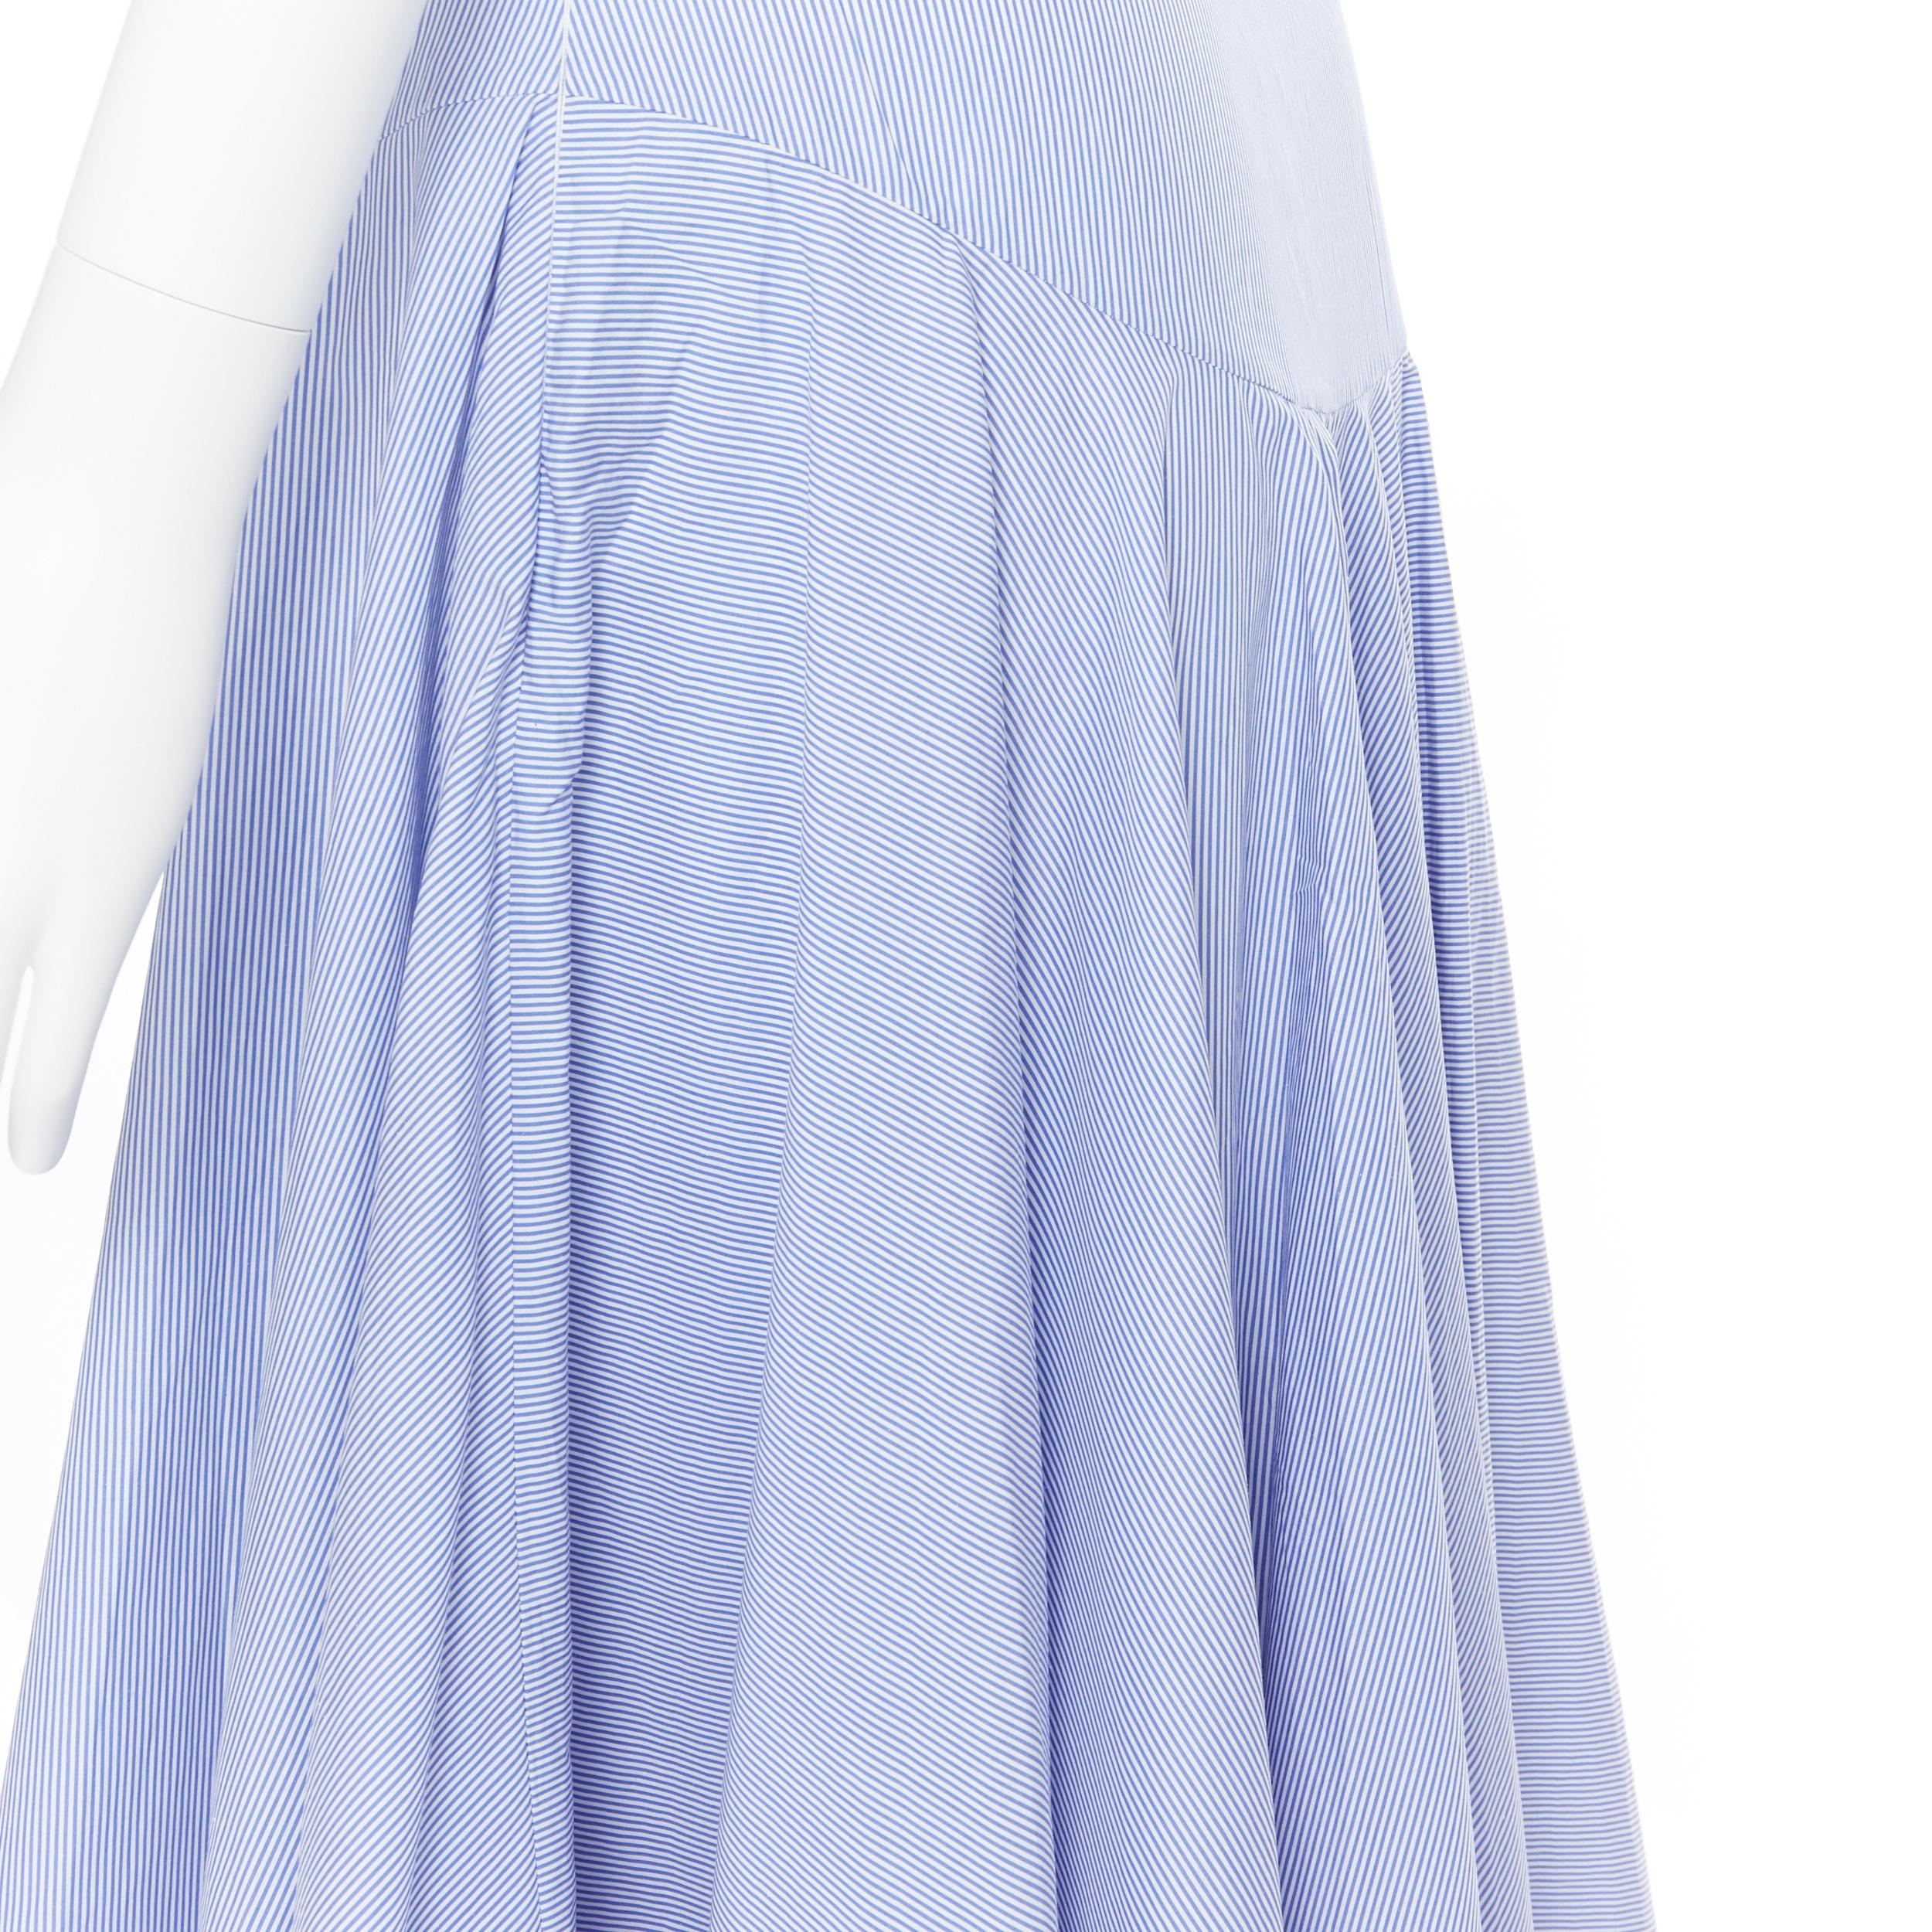 LOEWE 100% cotton blue whtie stripe belted dropped waist casual midi skirt FR34
Brand: Loewe
Designer: JW Anderson
Model Name / Style: Cotton midi skirt
Material: Cotton
Color: Blue
Pattern: Striped
Closure: Zip
Extra Detail: Attached belt